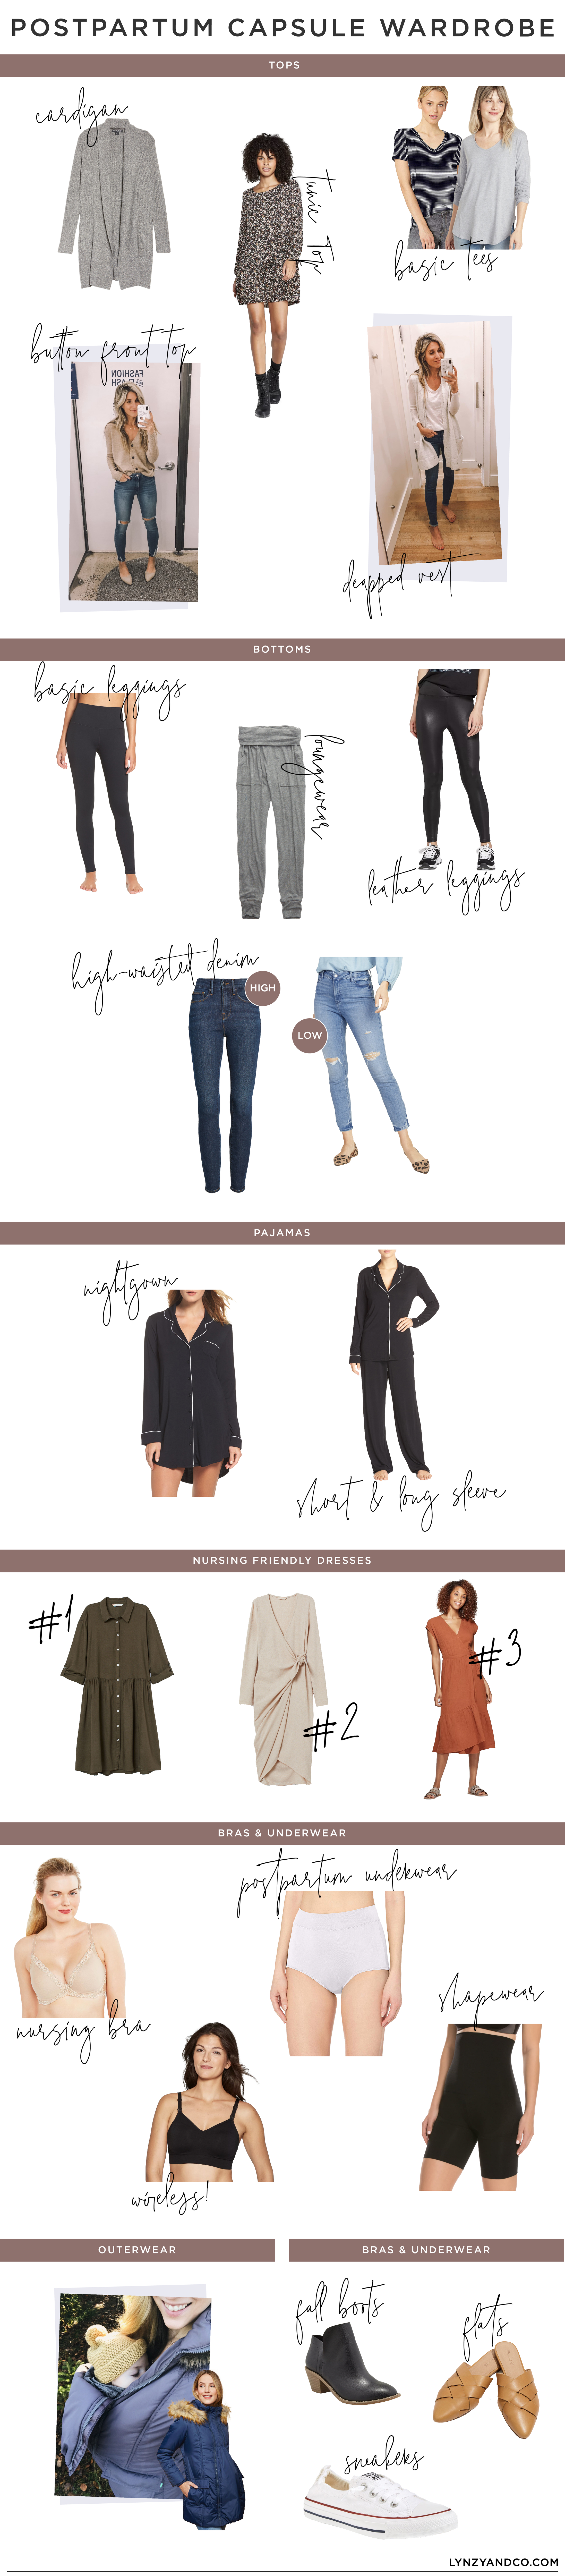 Post-partum Wardrobe Planning for a Closet Full of Me-Made Clothes